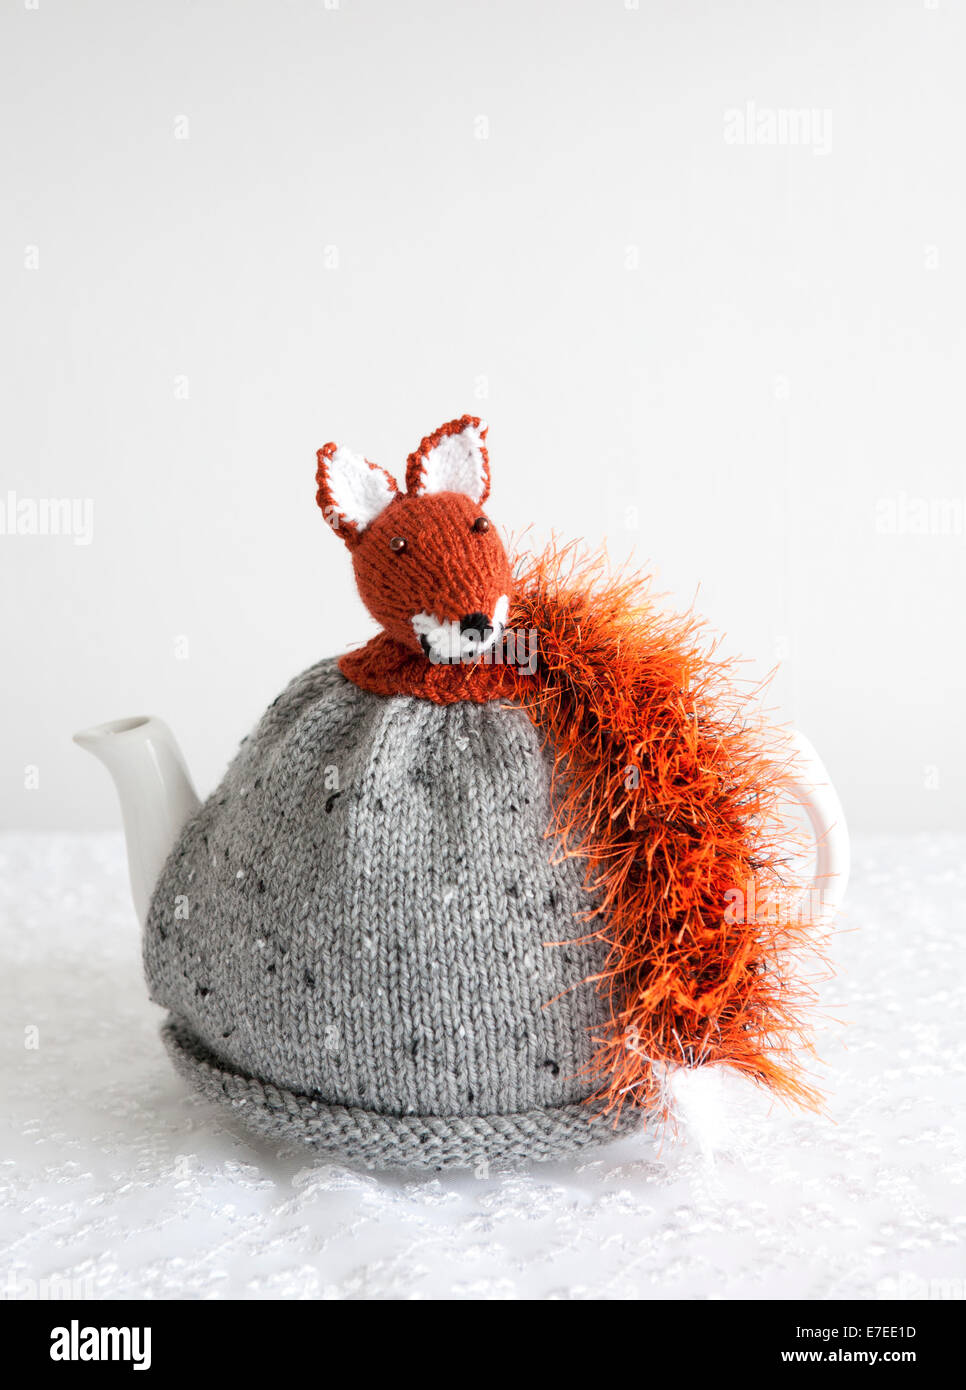 Vintage style handknitted tea cosy with a knitted Fox on the top Stock Photo